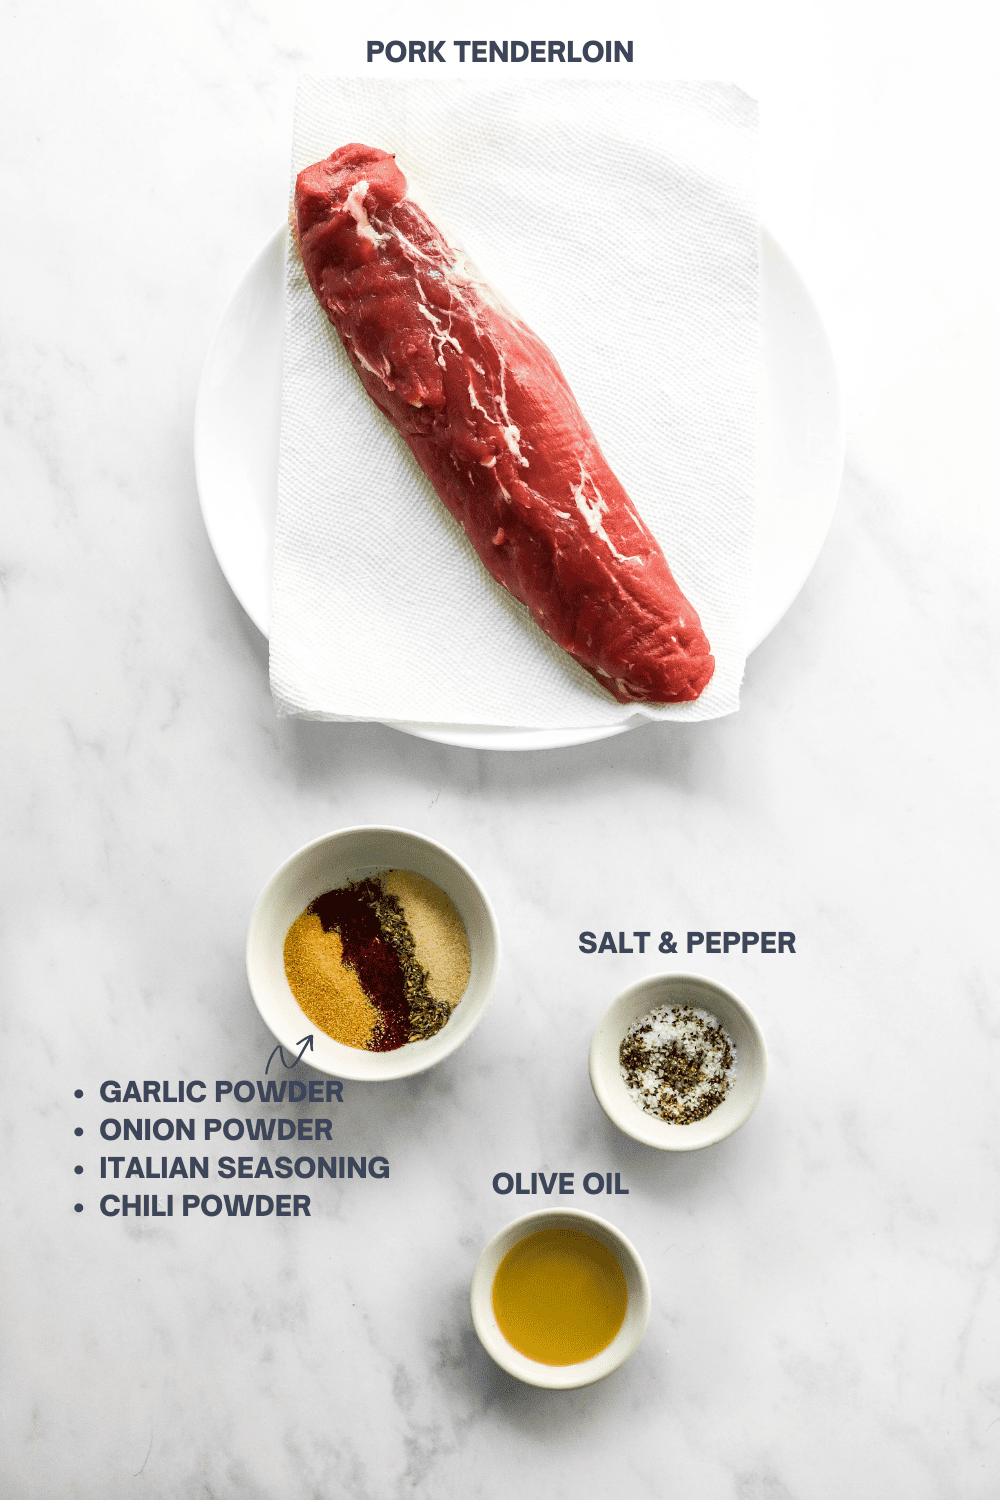 Raw tenderloin on a round white plate with a small round bowl of seasoning, bowl of salt and pepper and a bowl of olive oil in front of it on a marble surface with labels for each ingredients next to them. 